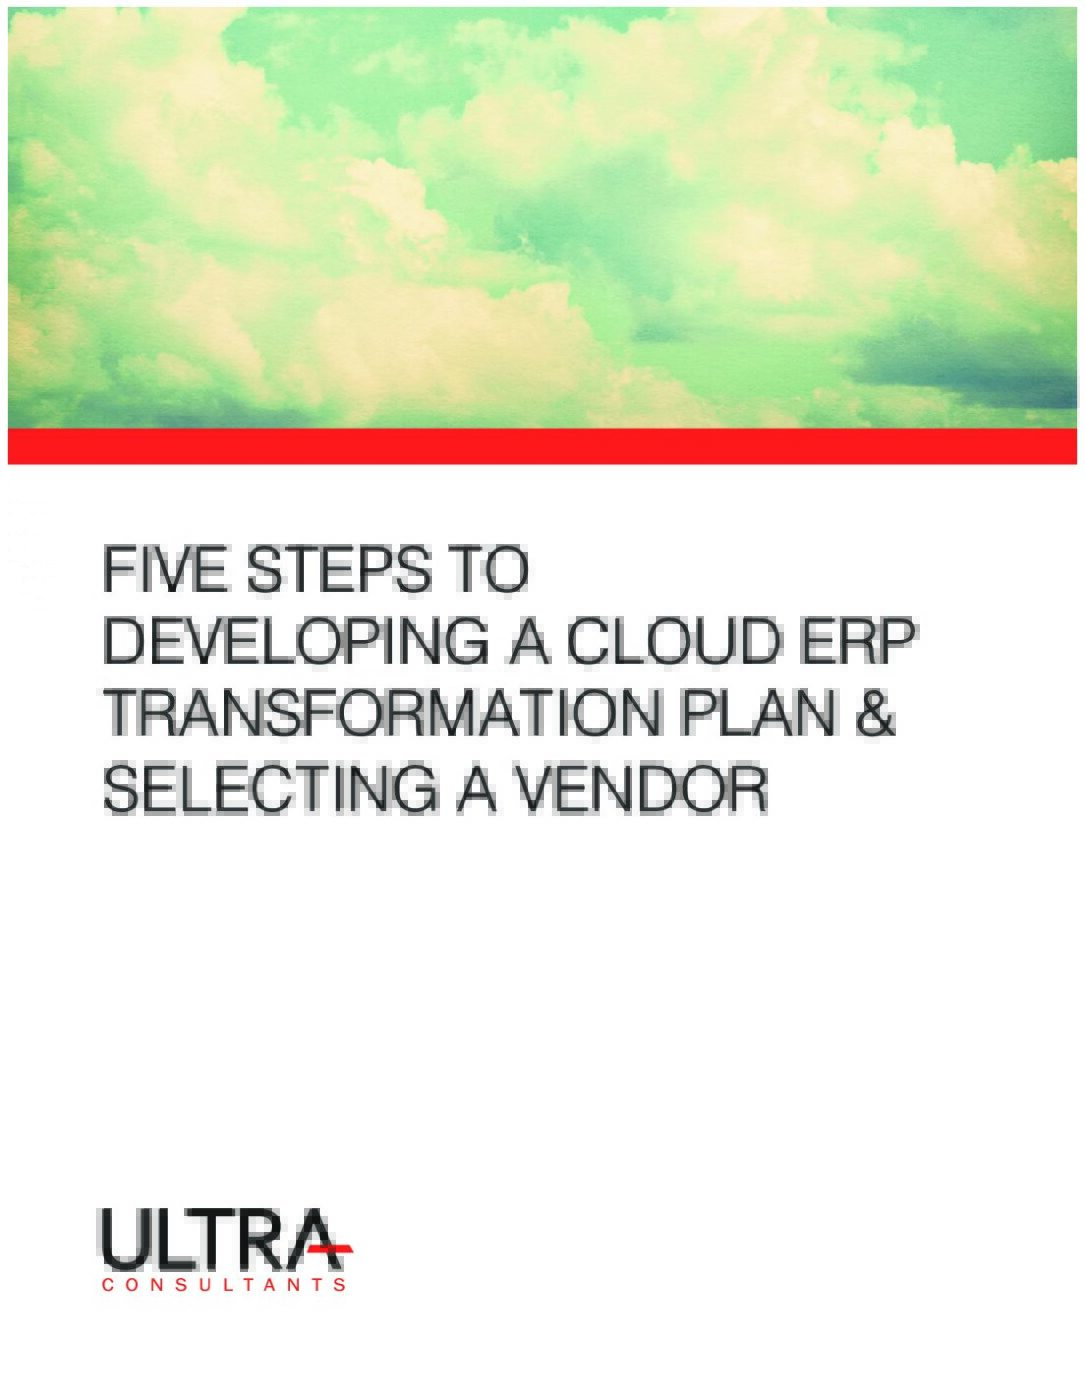 Steps to develop could ERP transformation plan